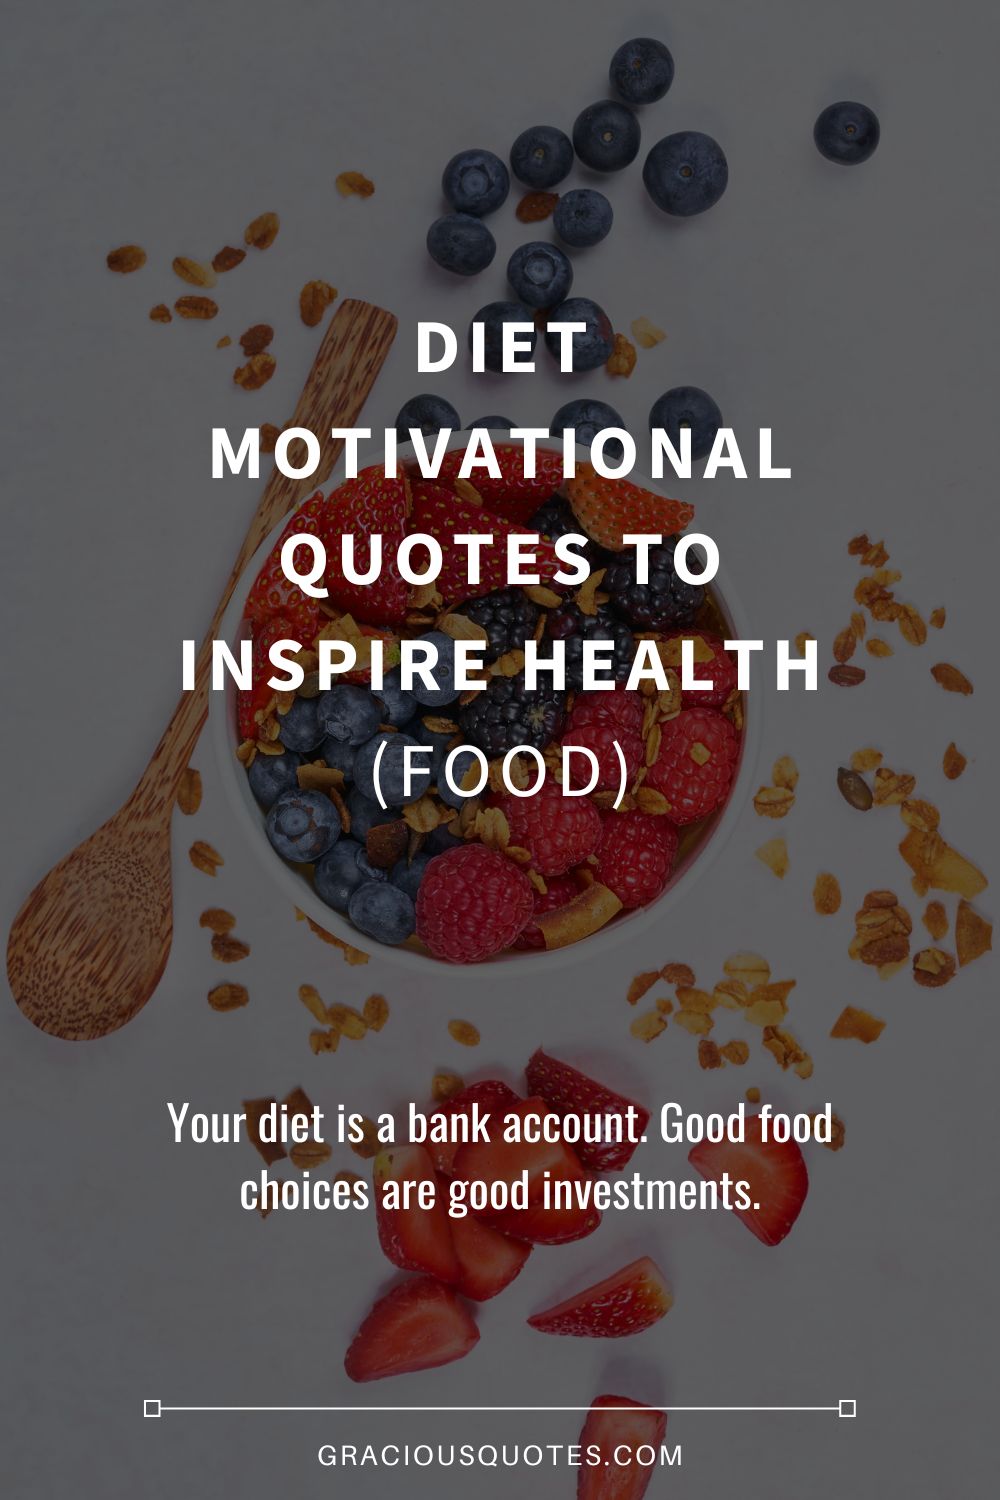 Diet Motivational Quotes to Inspire Health (FOOD) - Gracious Quotes